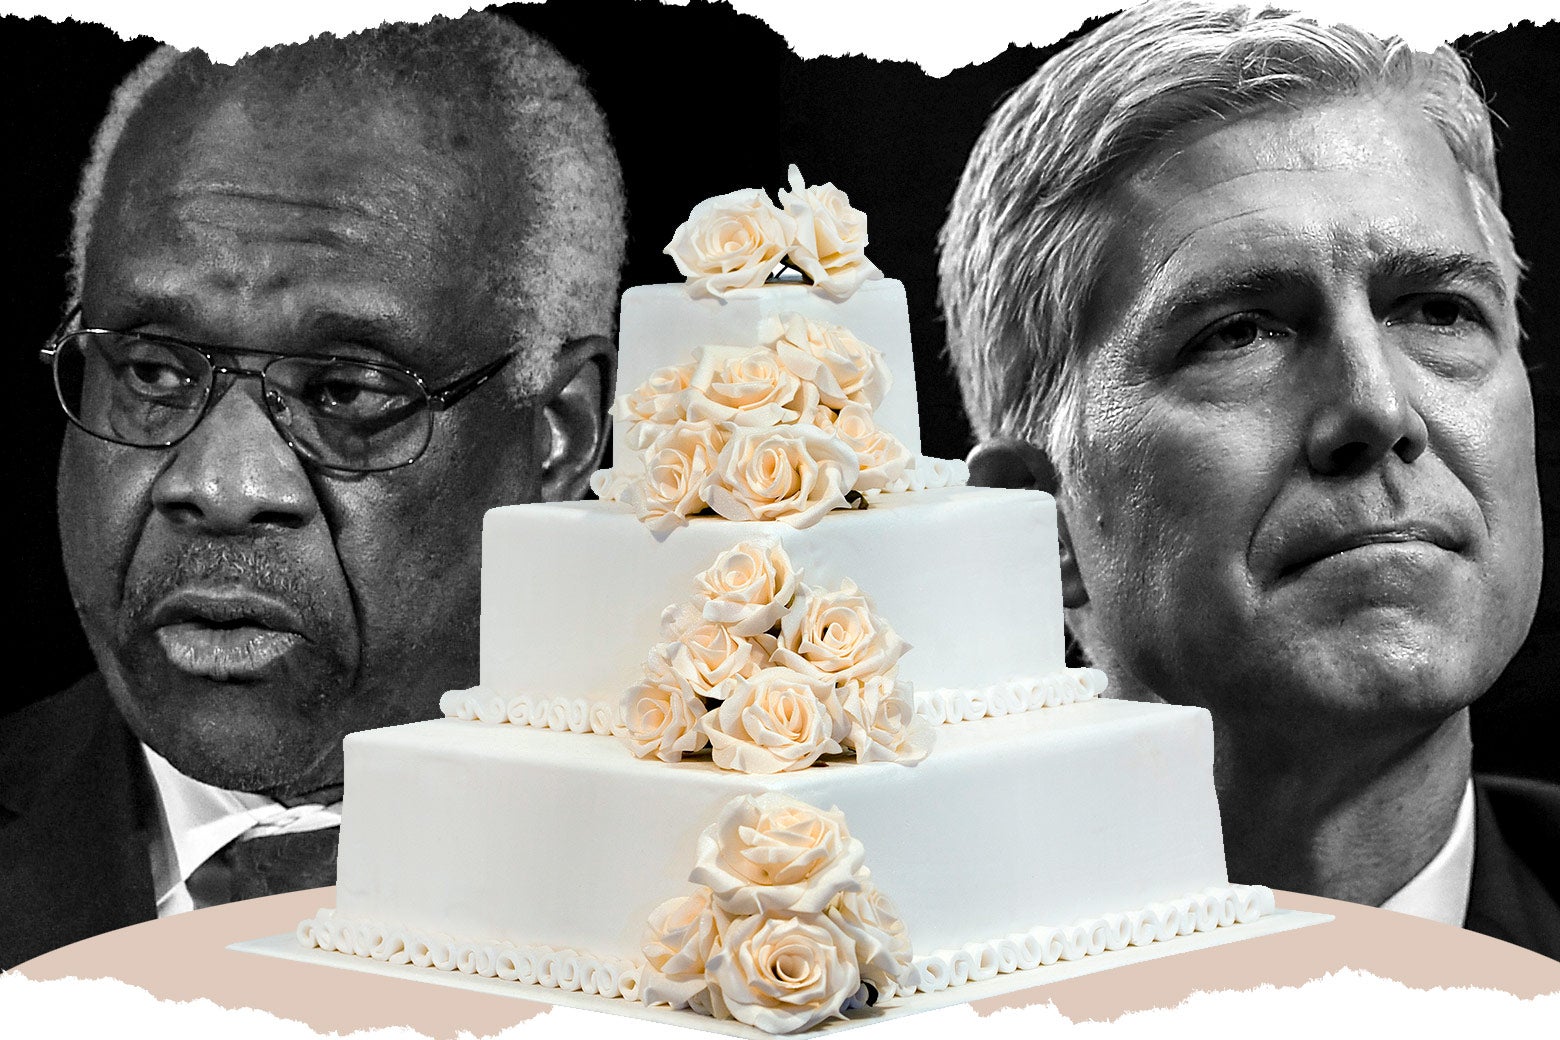 Justice Thomas, a wedding cake, and Justice Gorsuch.